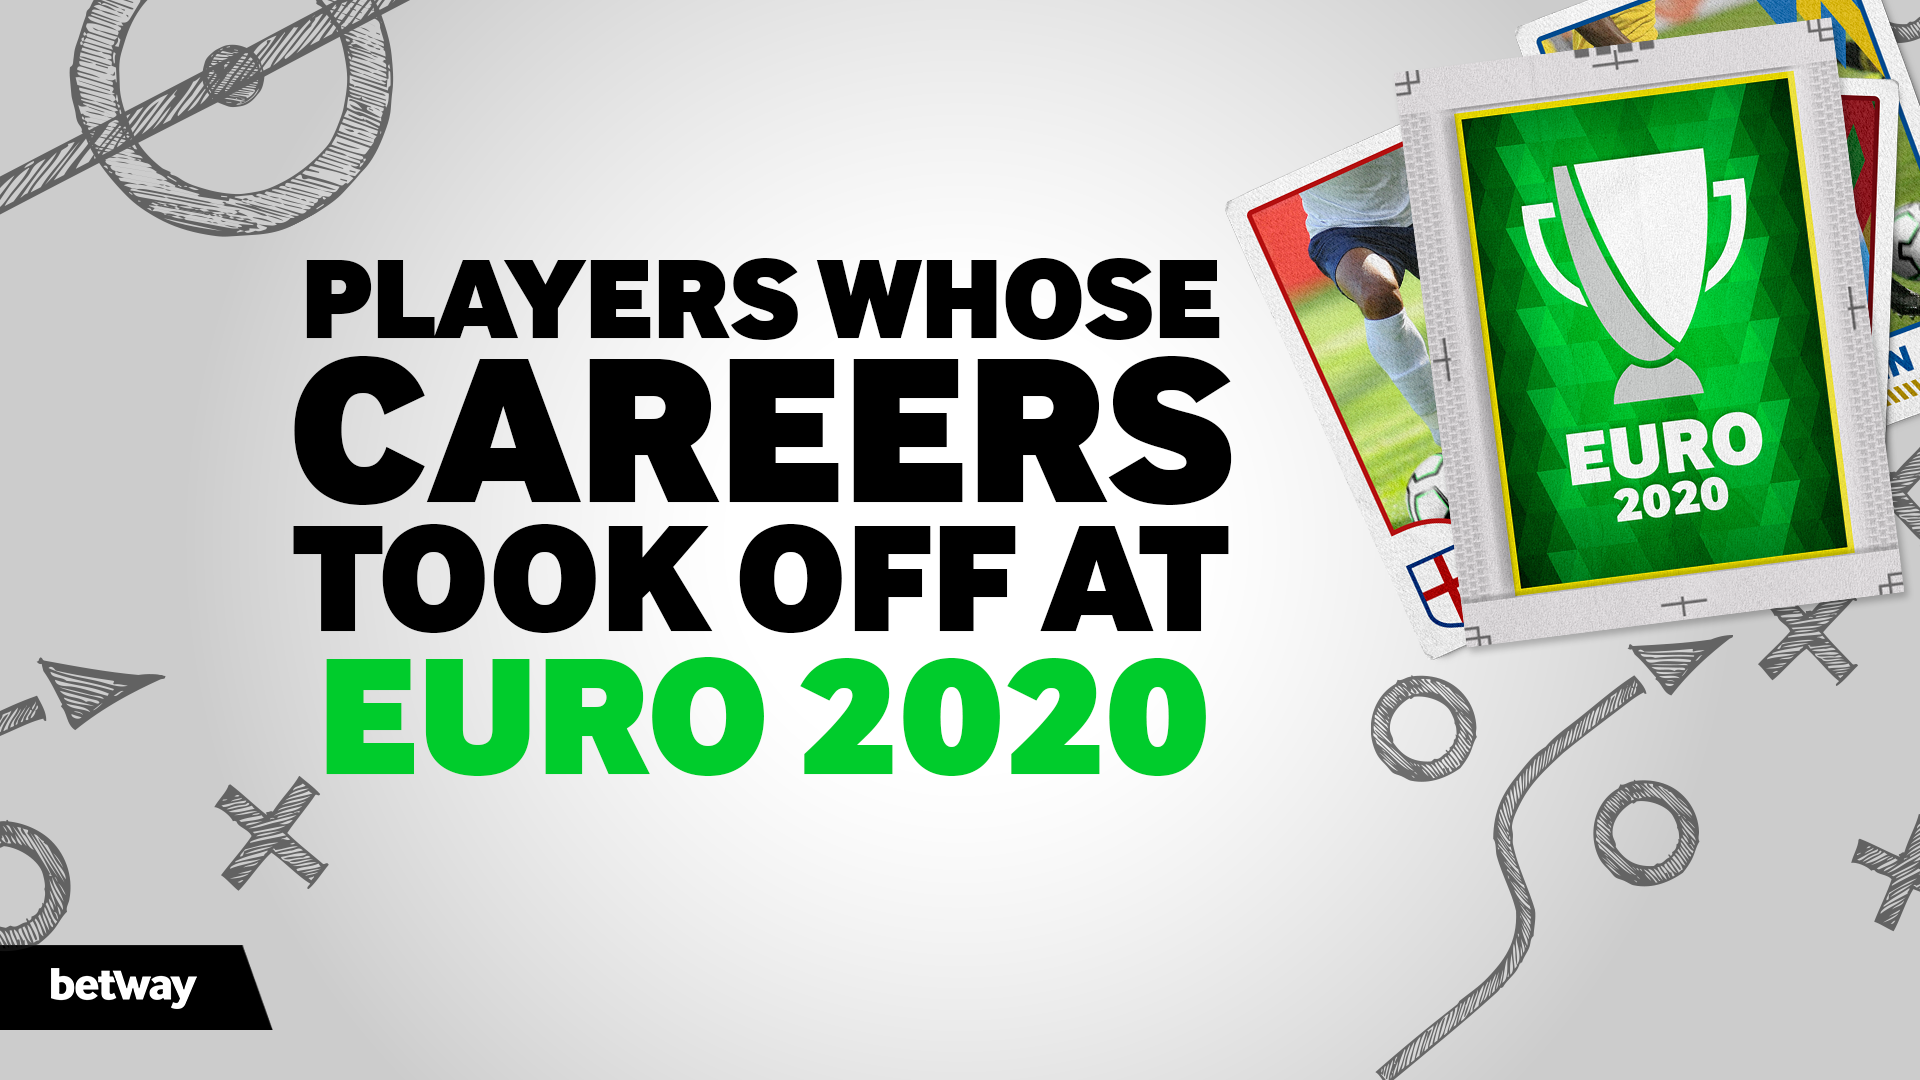 5 players whose careers took off at Euro 2020